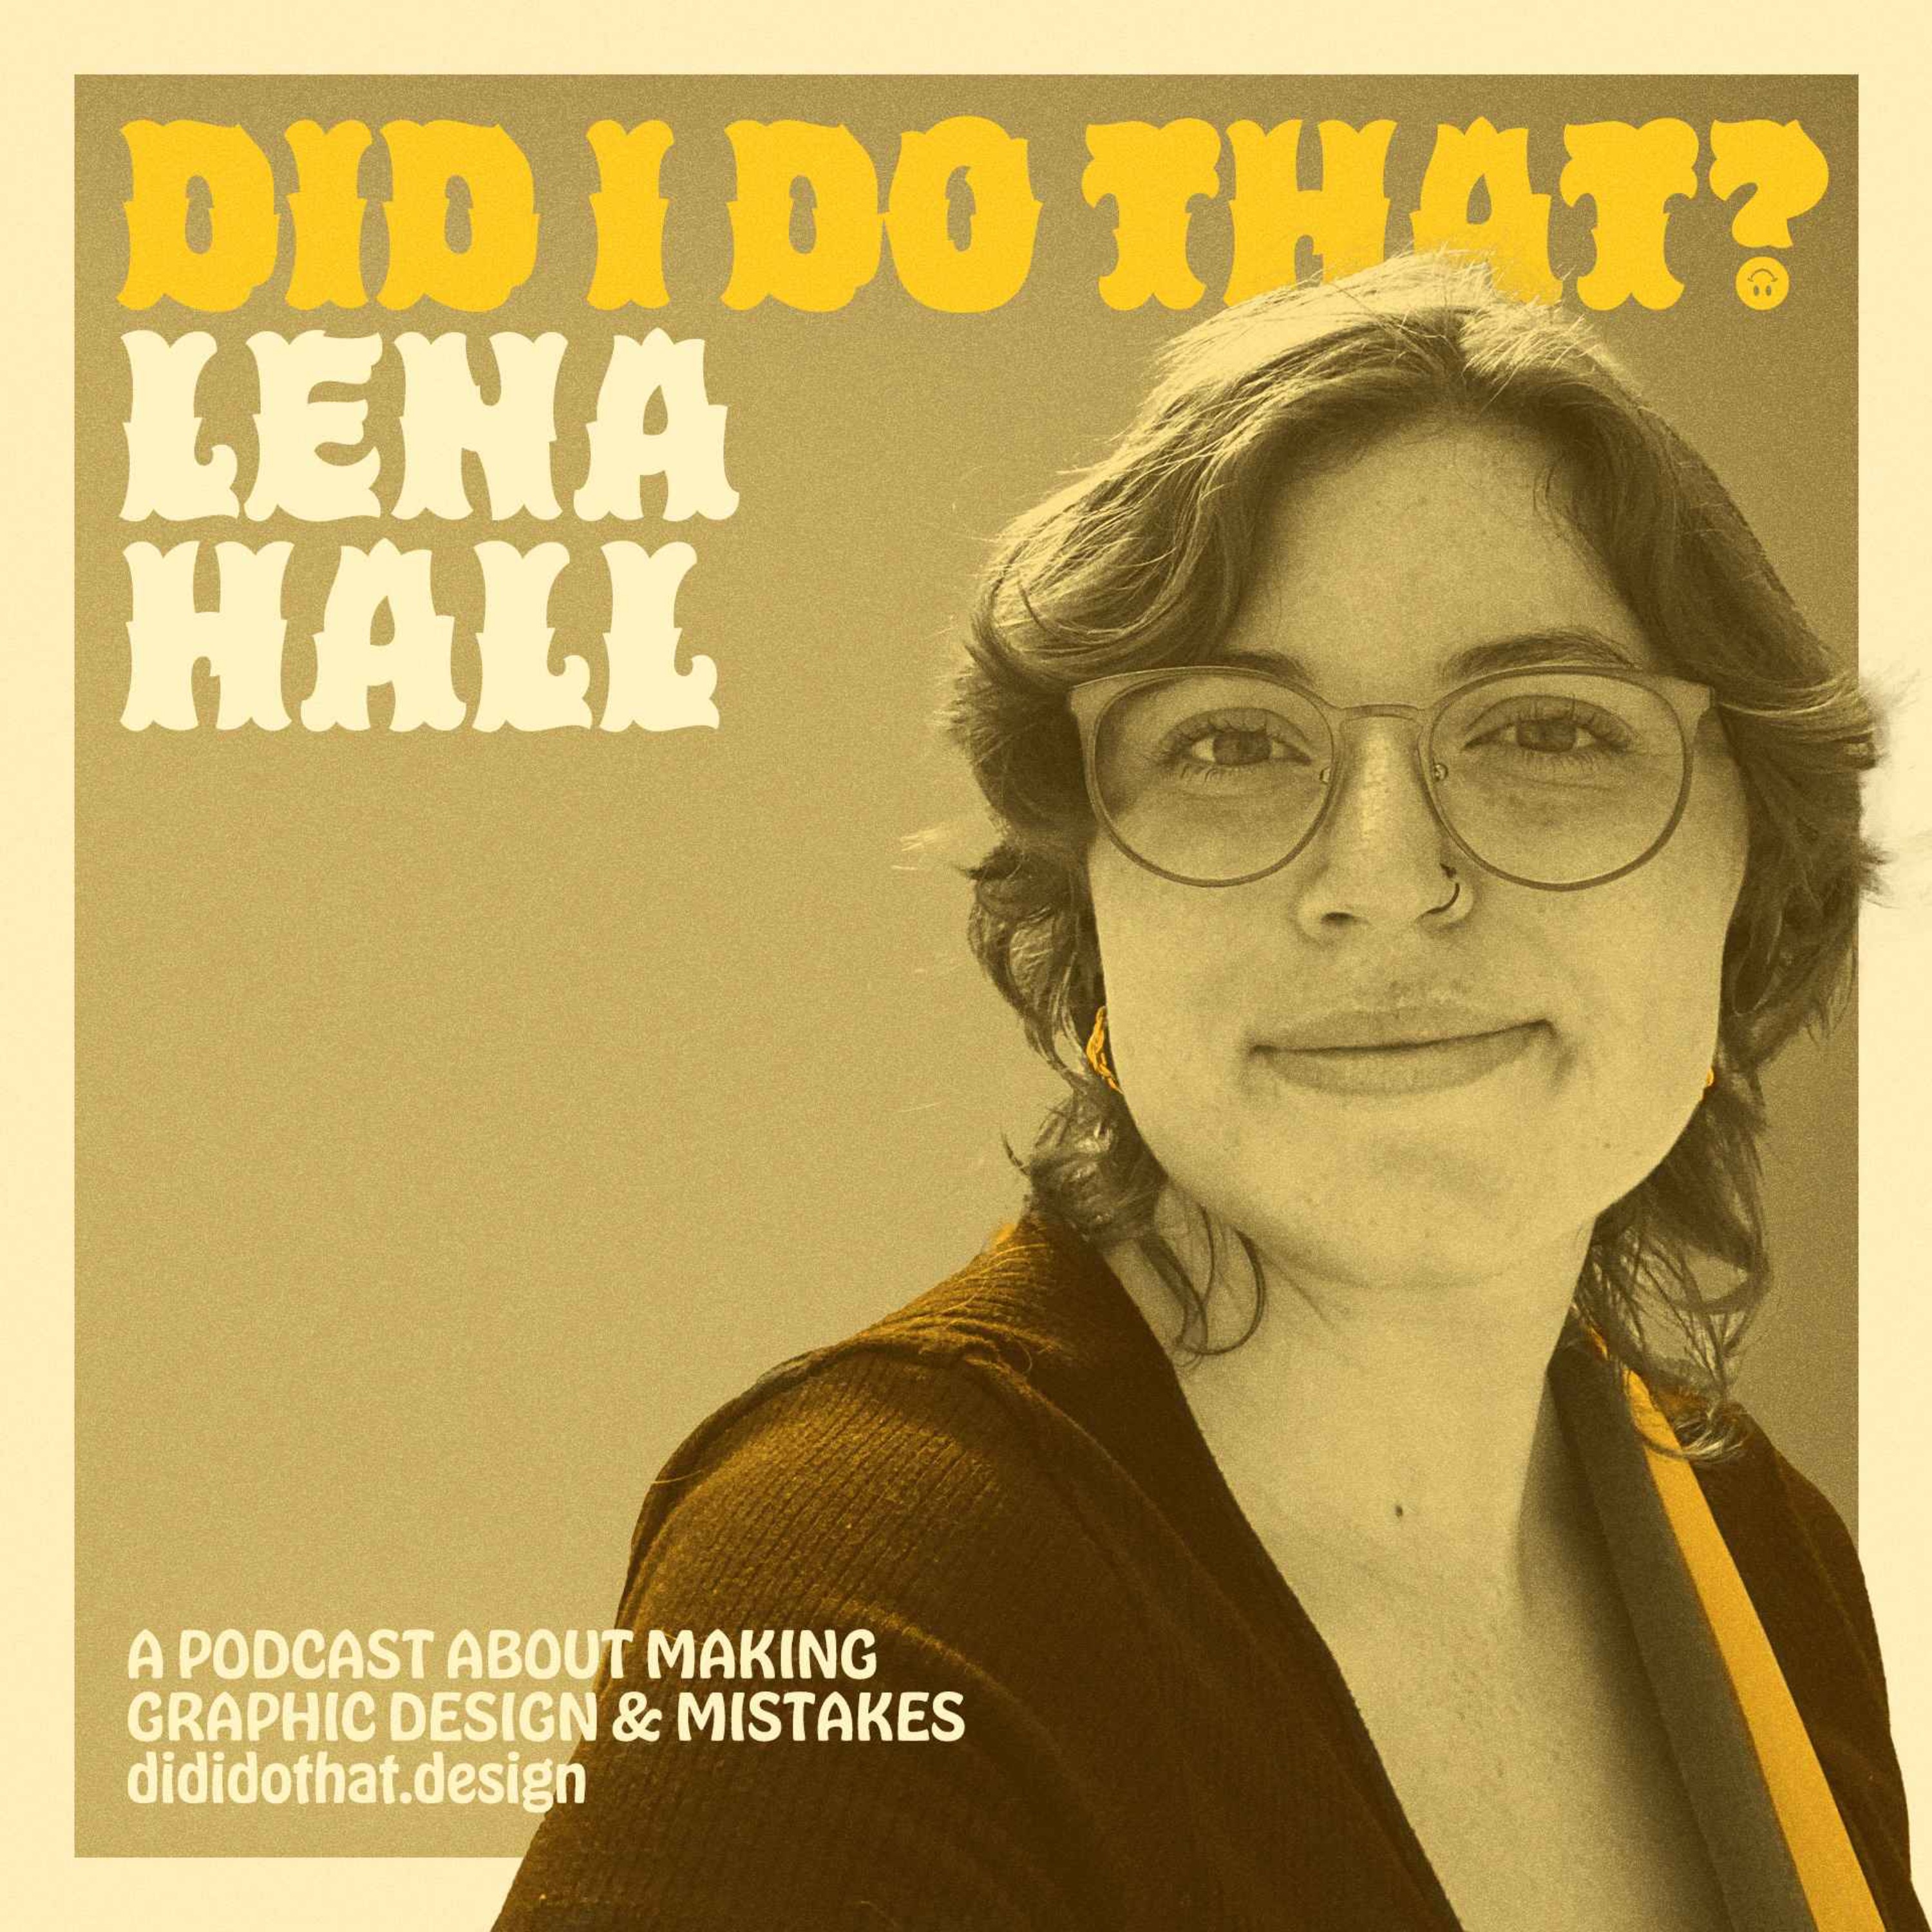 Now You See Me Too As Well (”Fontroversy” Crossover with Lena Hall)